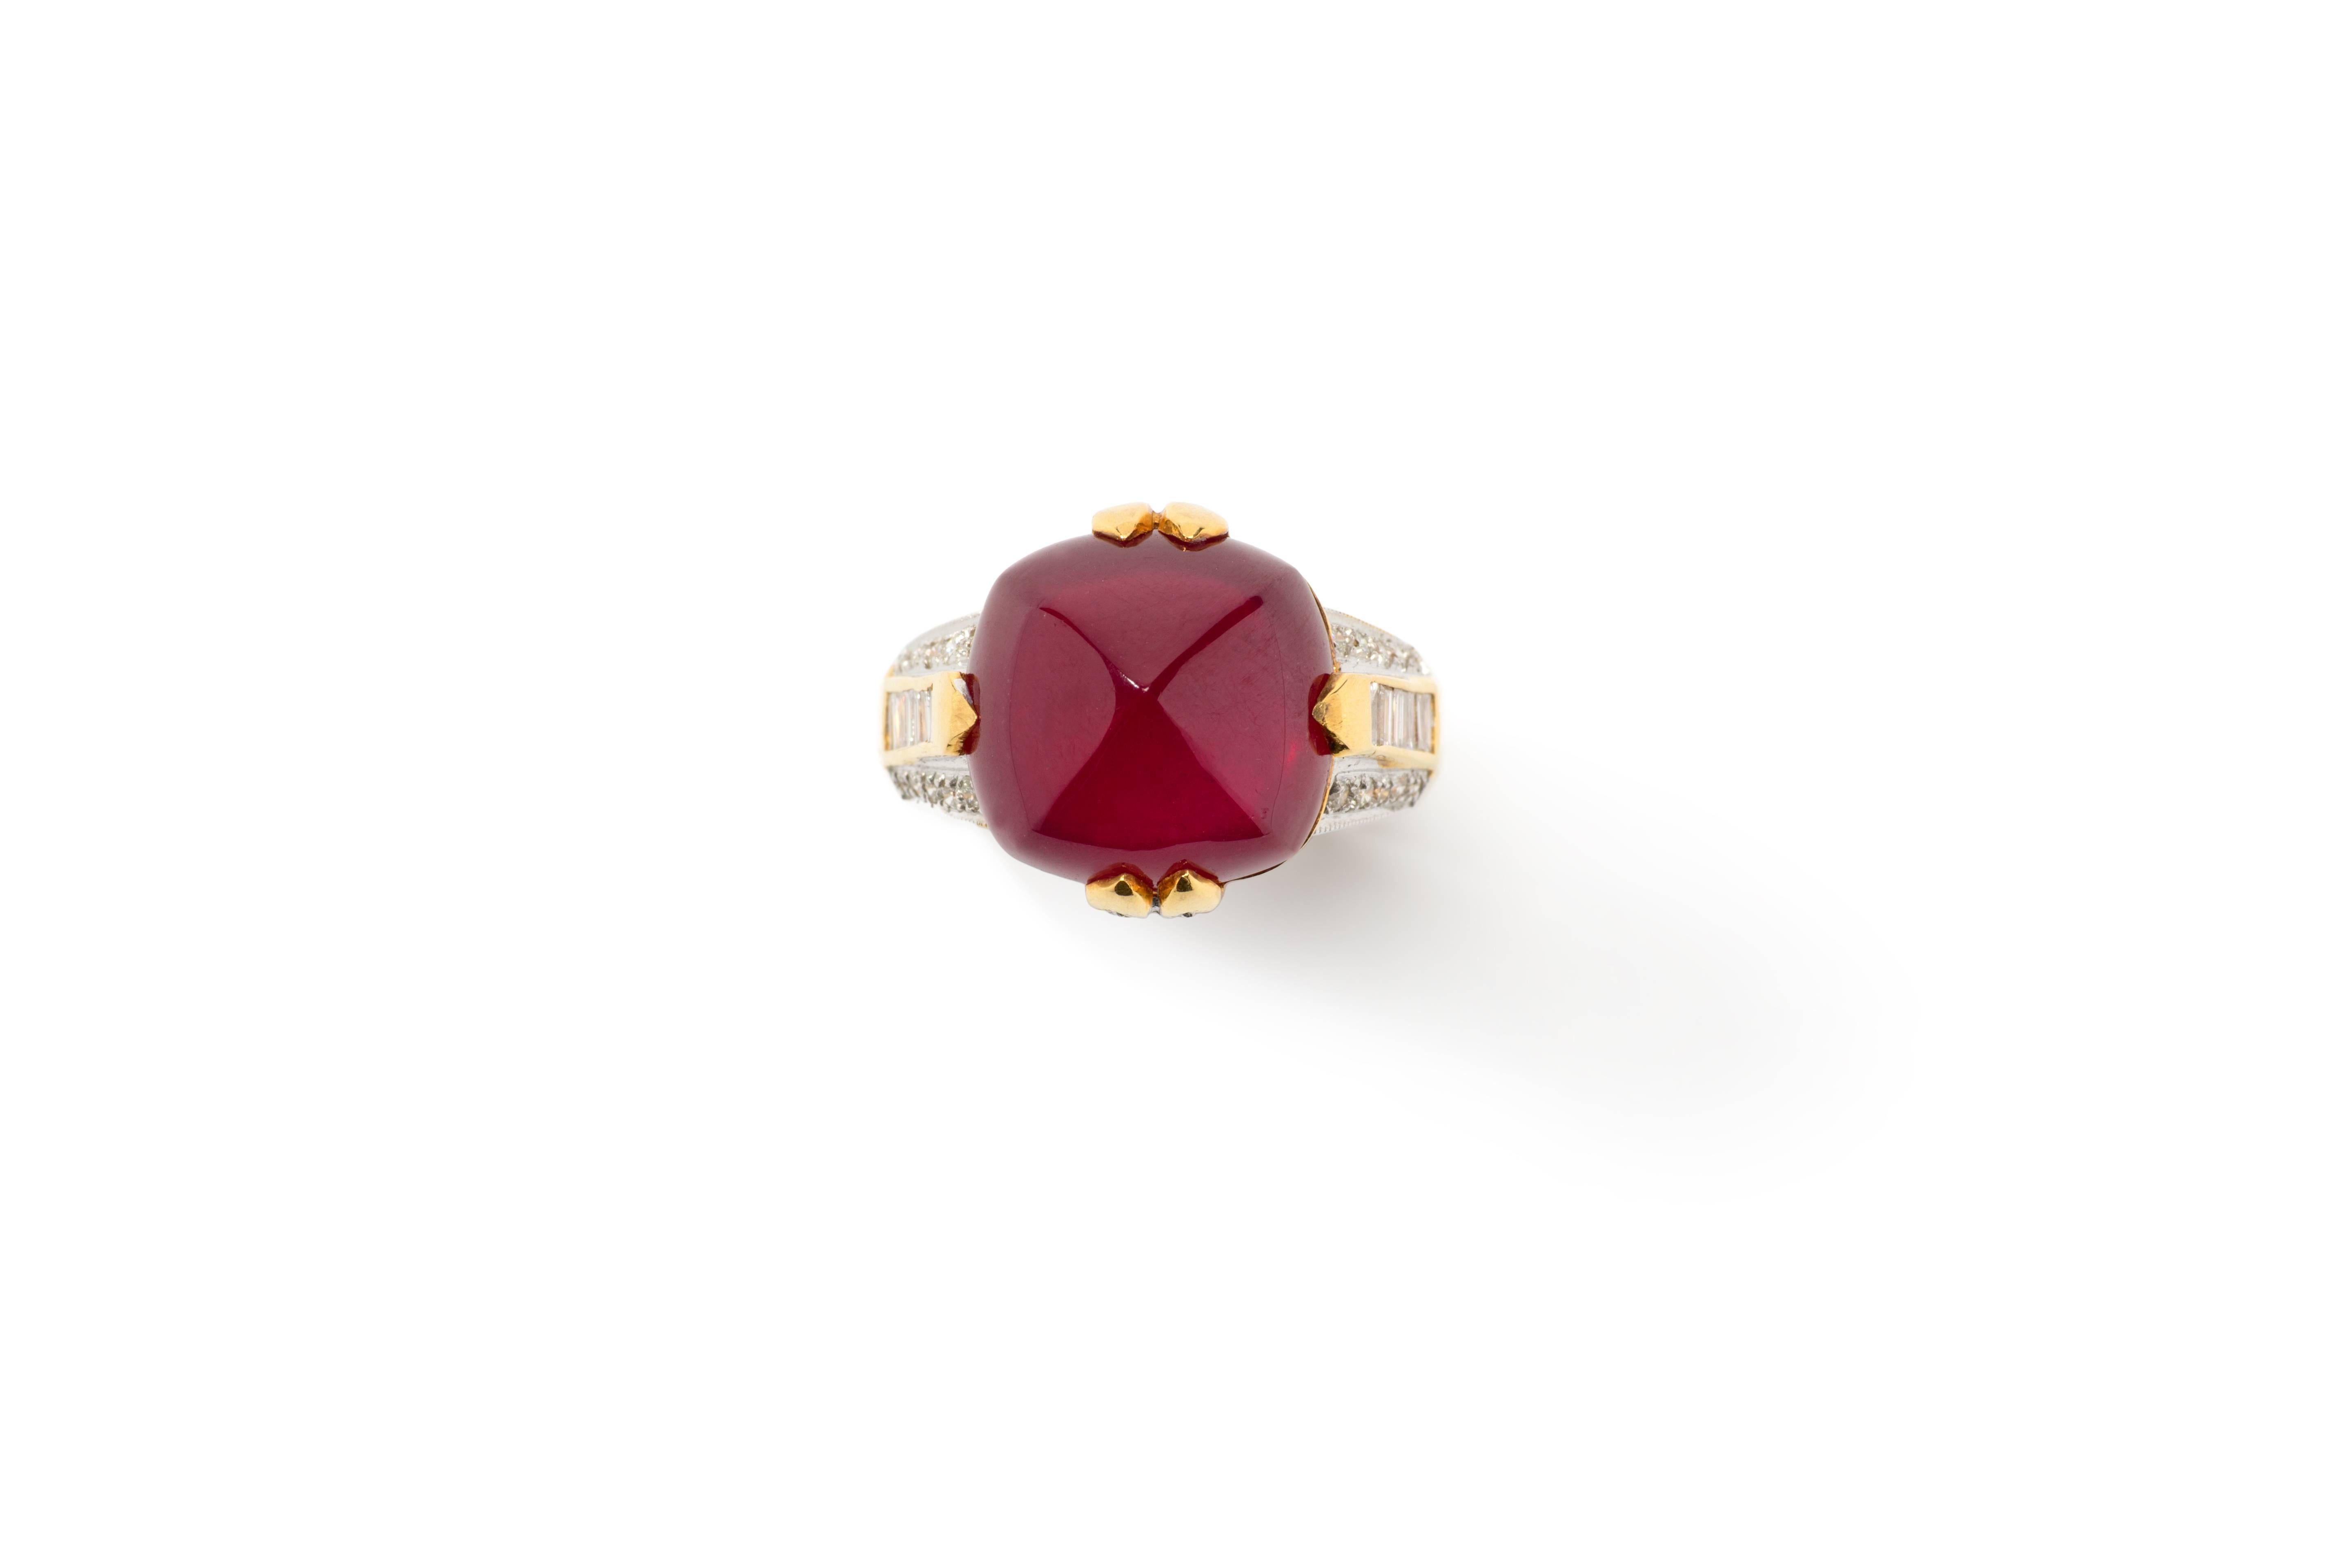 Central sugarloaf ruby weighing 18,78ct. Accompanied by 14 baguette-cut diamonds with a total weight of ca. 0,42ct and 28 brilliant-cut diamonds with a total weight of ca. 0,38ct. Mounted in 18 K yellow gold.Hallmarked inside with the purity 18K.